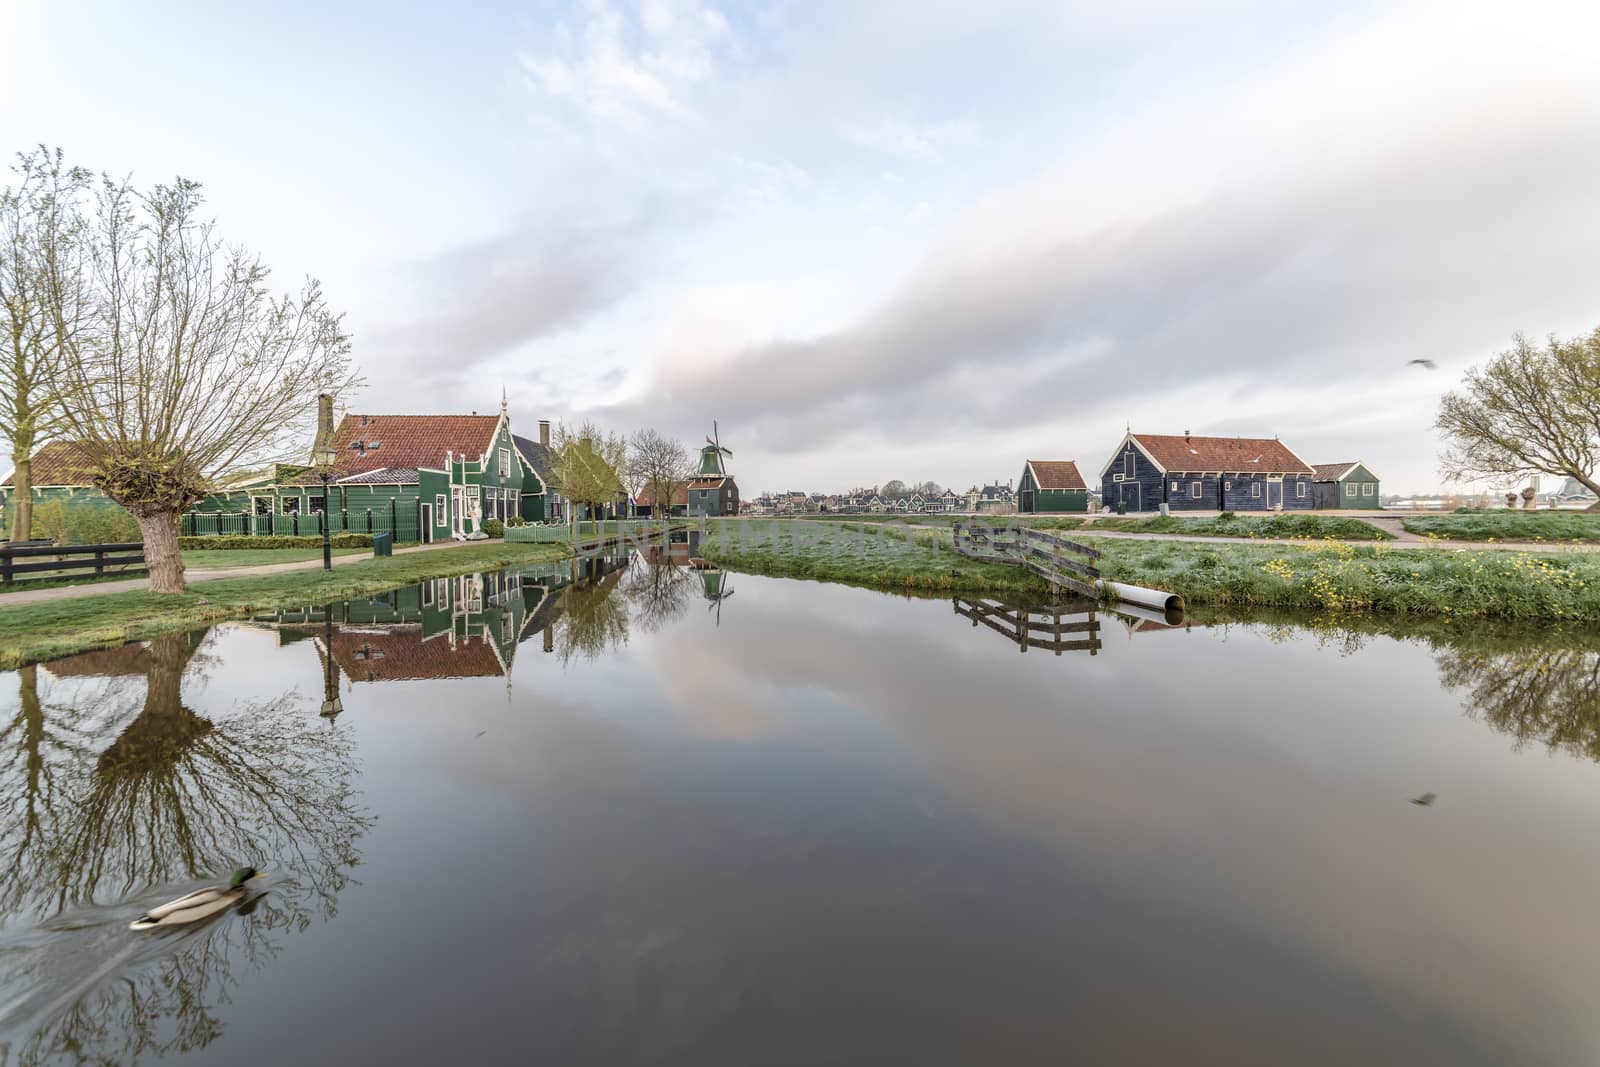 ZAANSE SCHANS, 14 April 2019 - Reflection of the wooden green houses topped with dark orange color roof reflected on the calm water of the canal by ankorlight